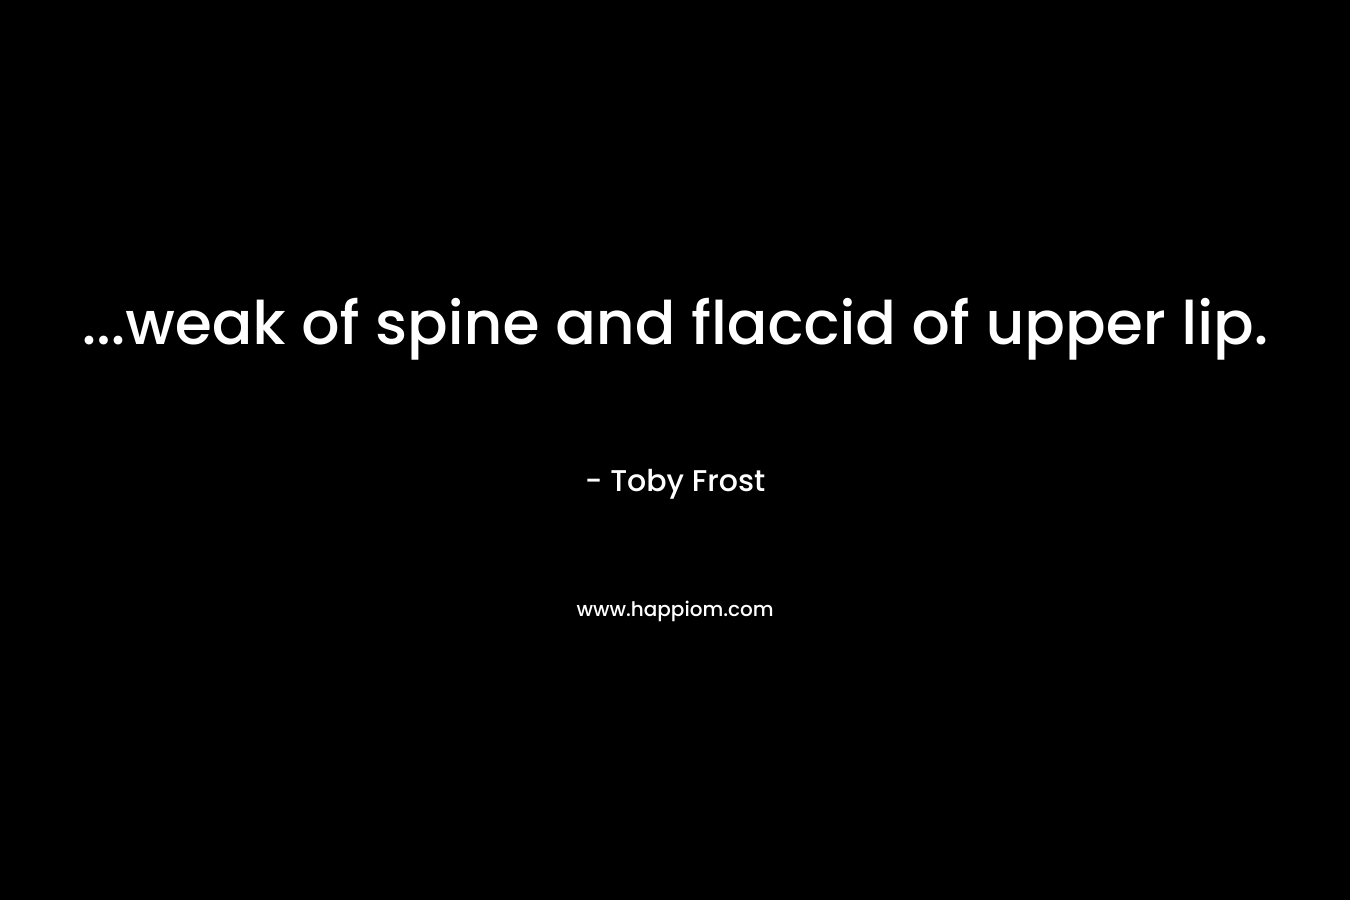 …weak of spine and flaccid of upper lip. – Toby Frost